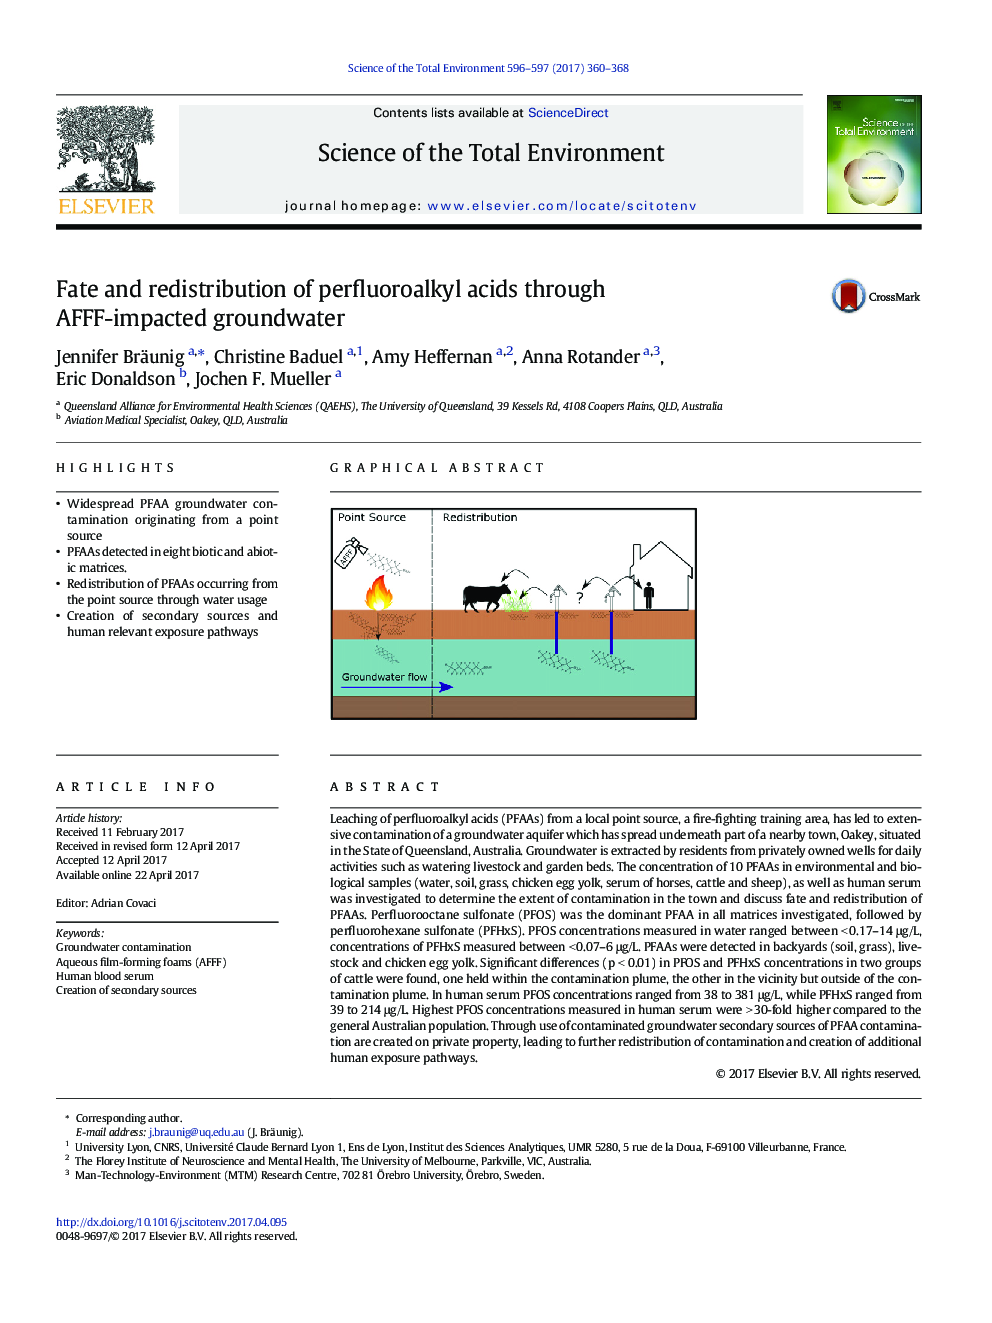 Fate and redistribution of perfluoroalkyl acids through AFFF-impacted groundwater